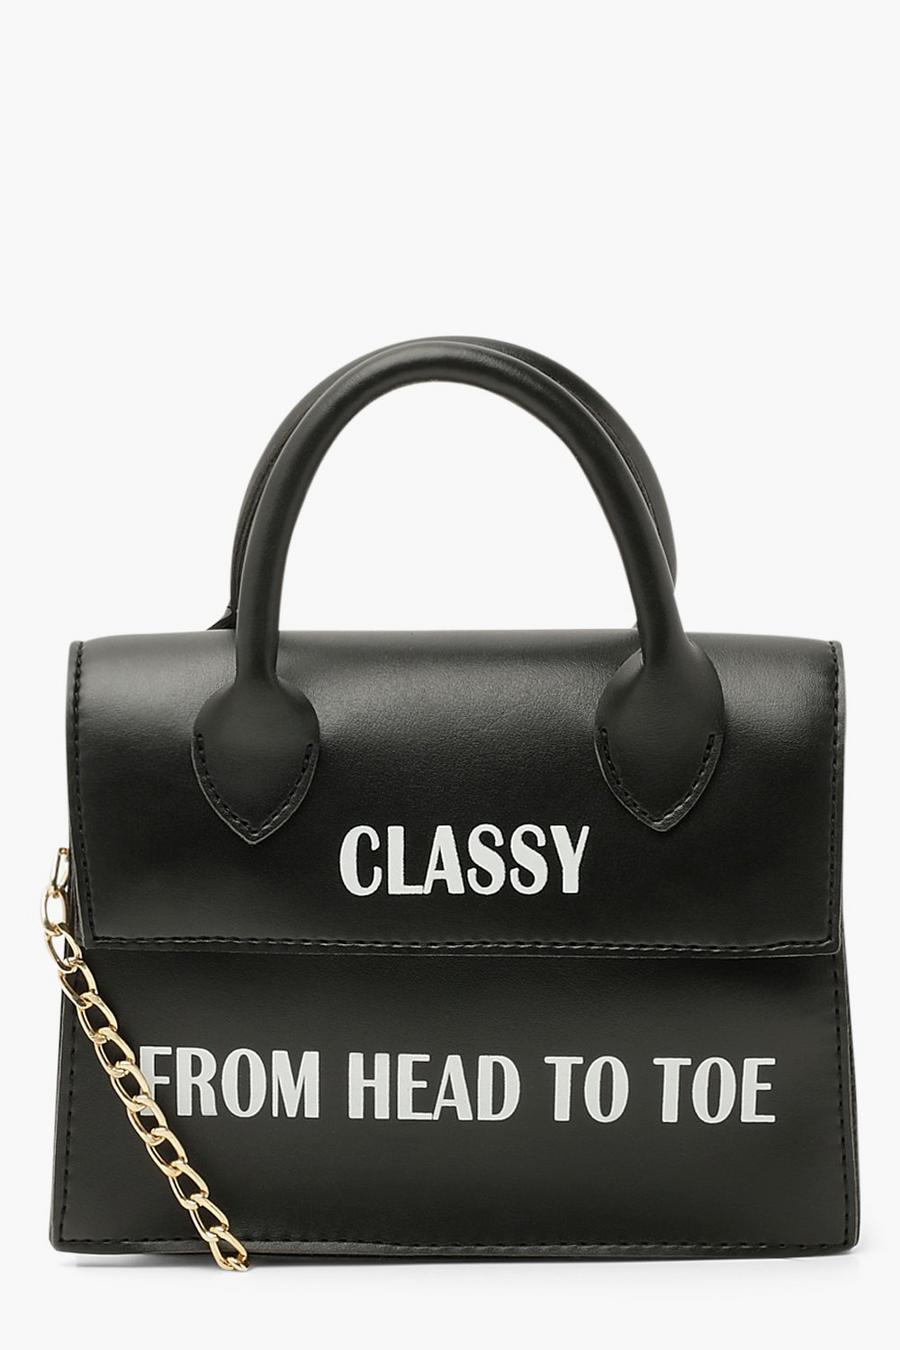 Borsa a tracolla “Classy From Head To Toe” image number 1